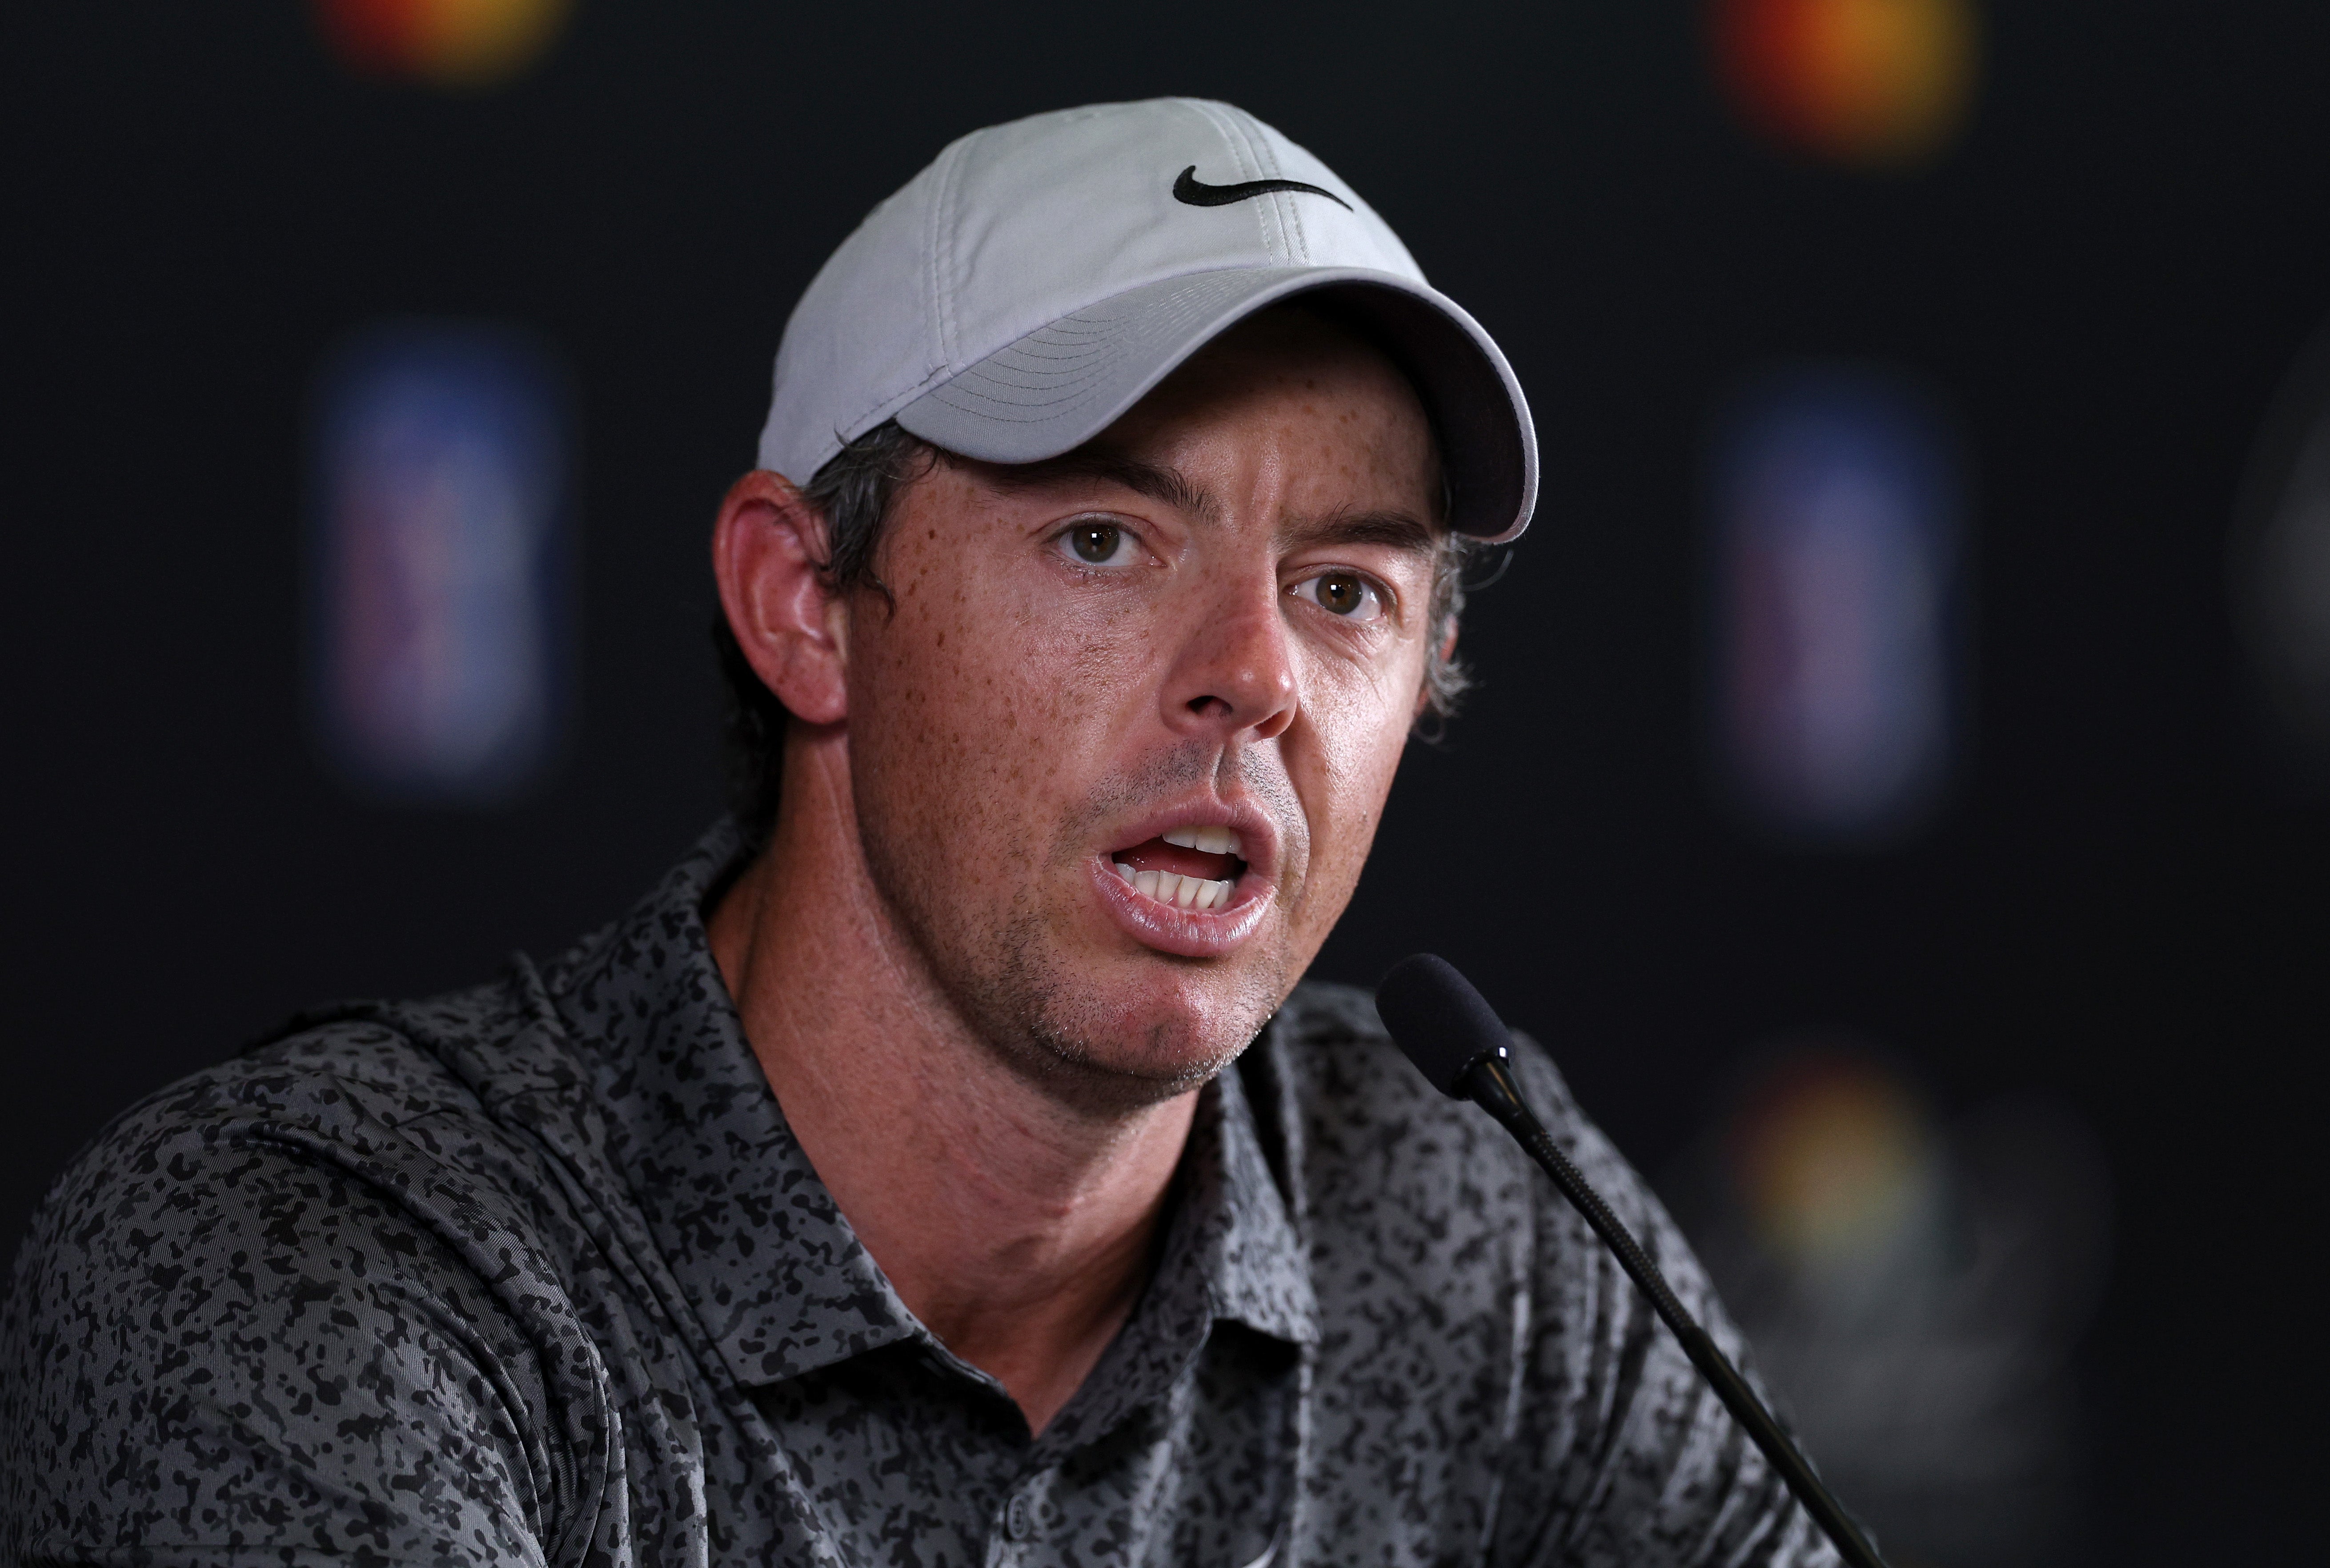 Rory McIlroy is set to speak at the Canadian Open after the PGA Tour and LIV Golf merger